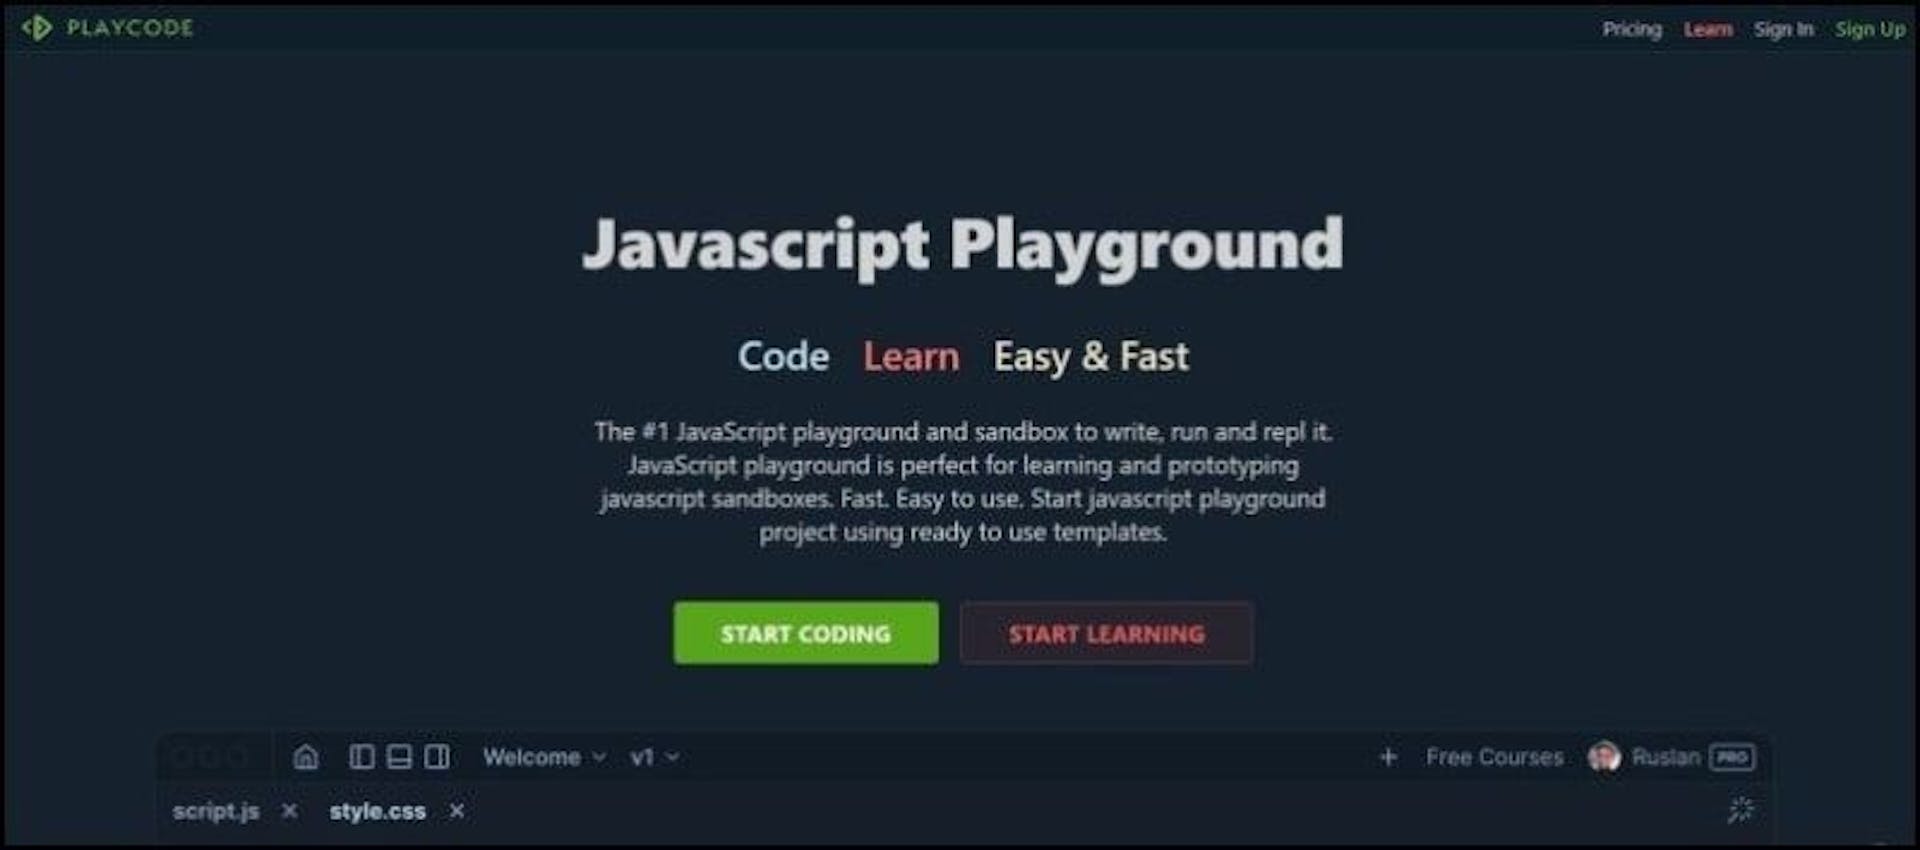 PlayCode - A Code Playground for Web Developers